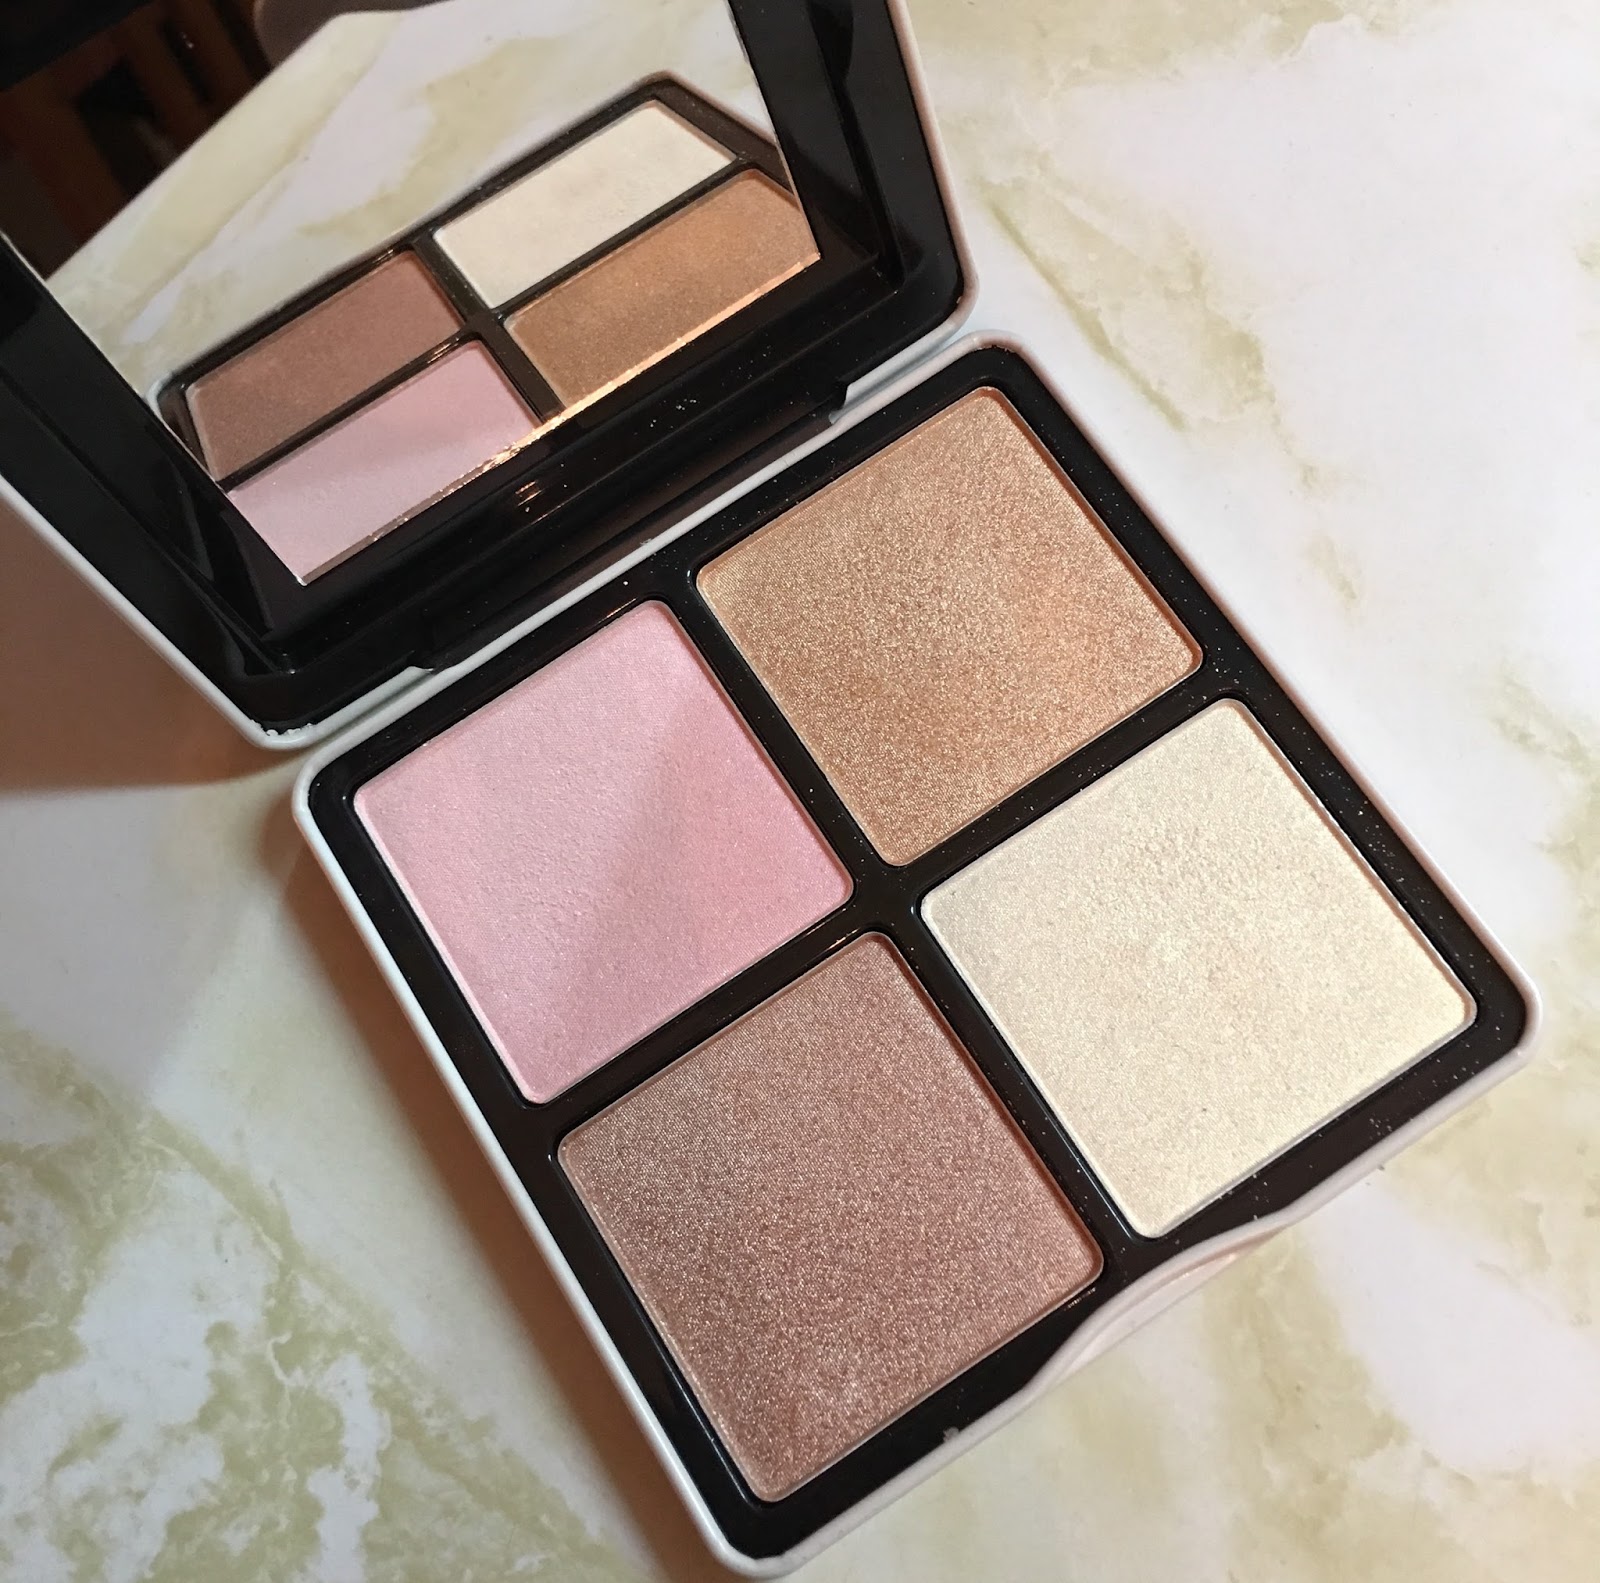 BH Cosmetics Nude Rose Highlight Swatches | Top Beauty 